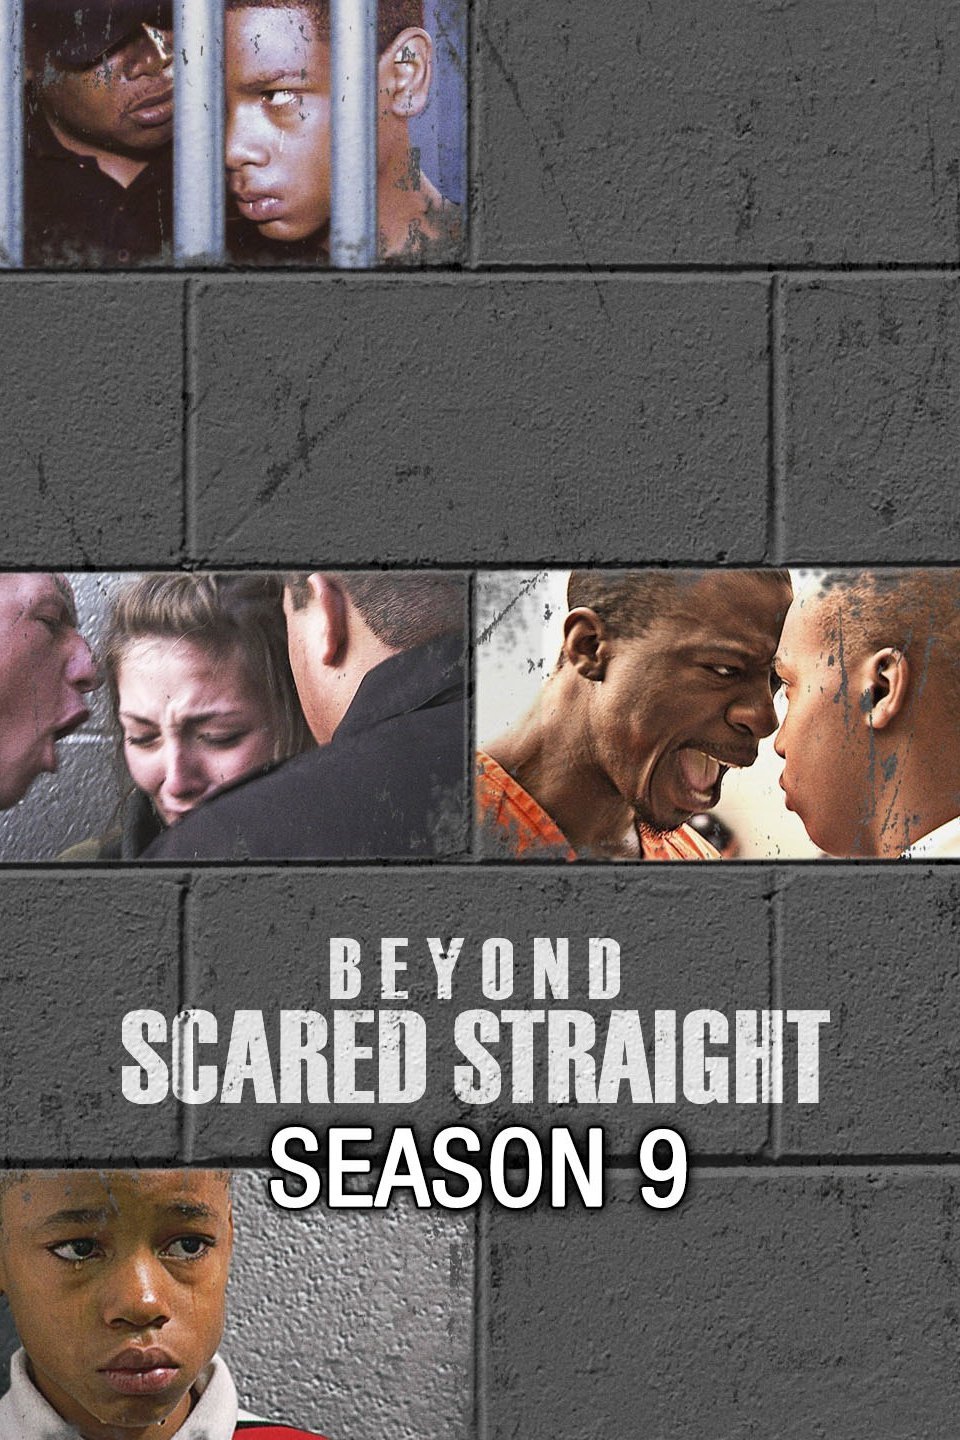 Lexi beyond scared straight